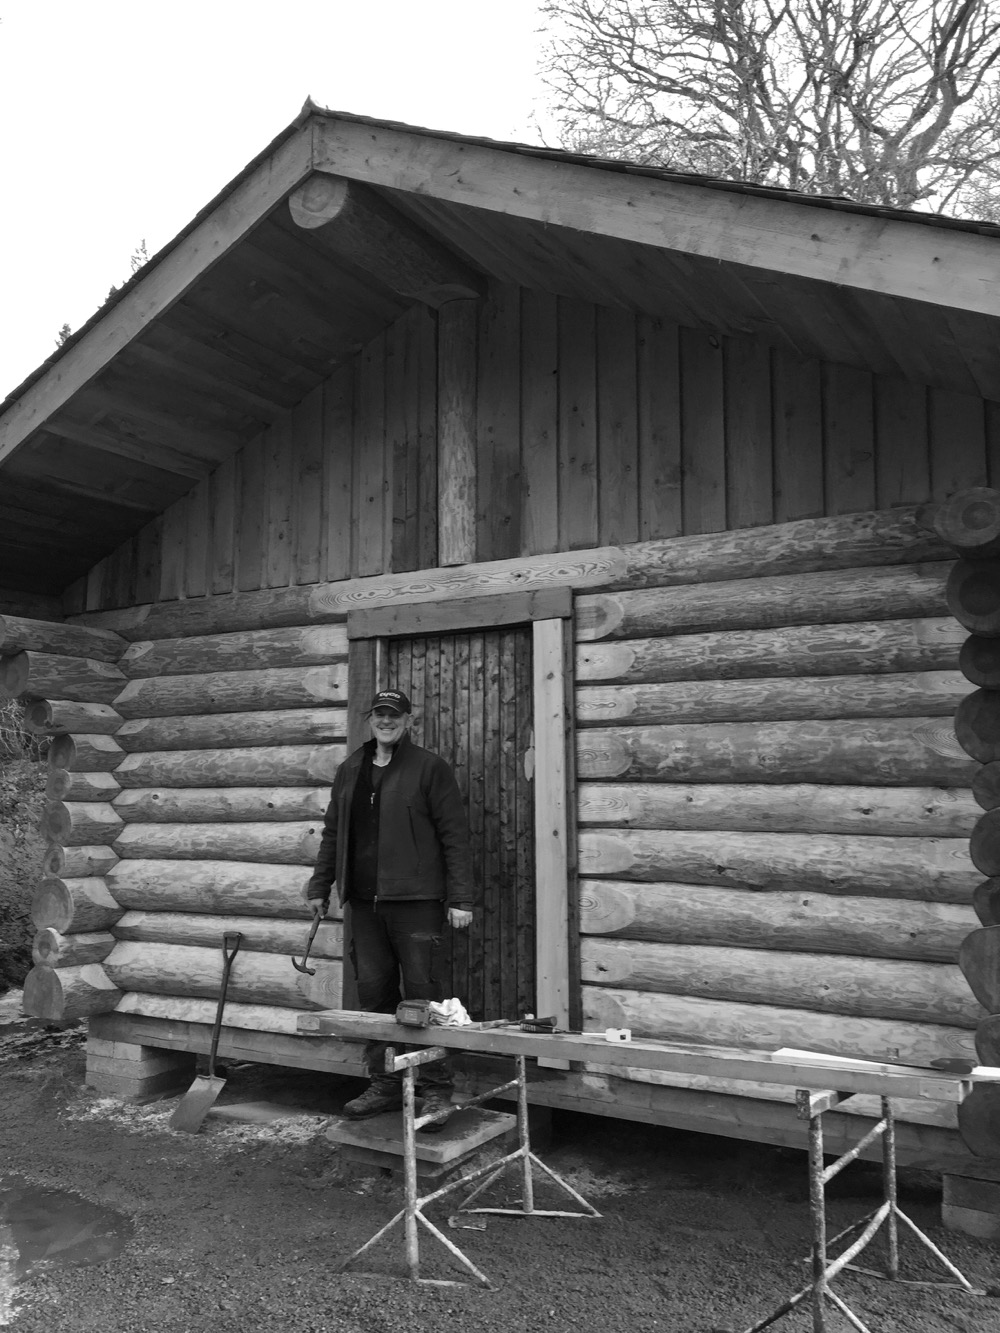 Ewen in front of the Canadian log cabin he built